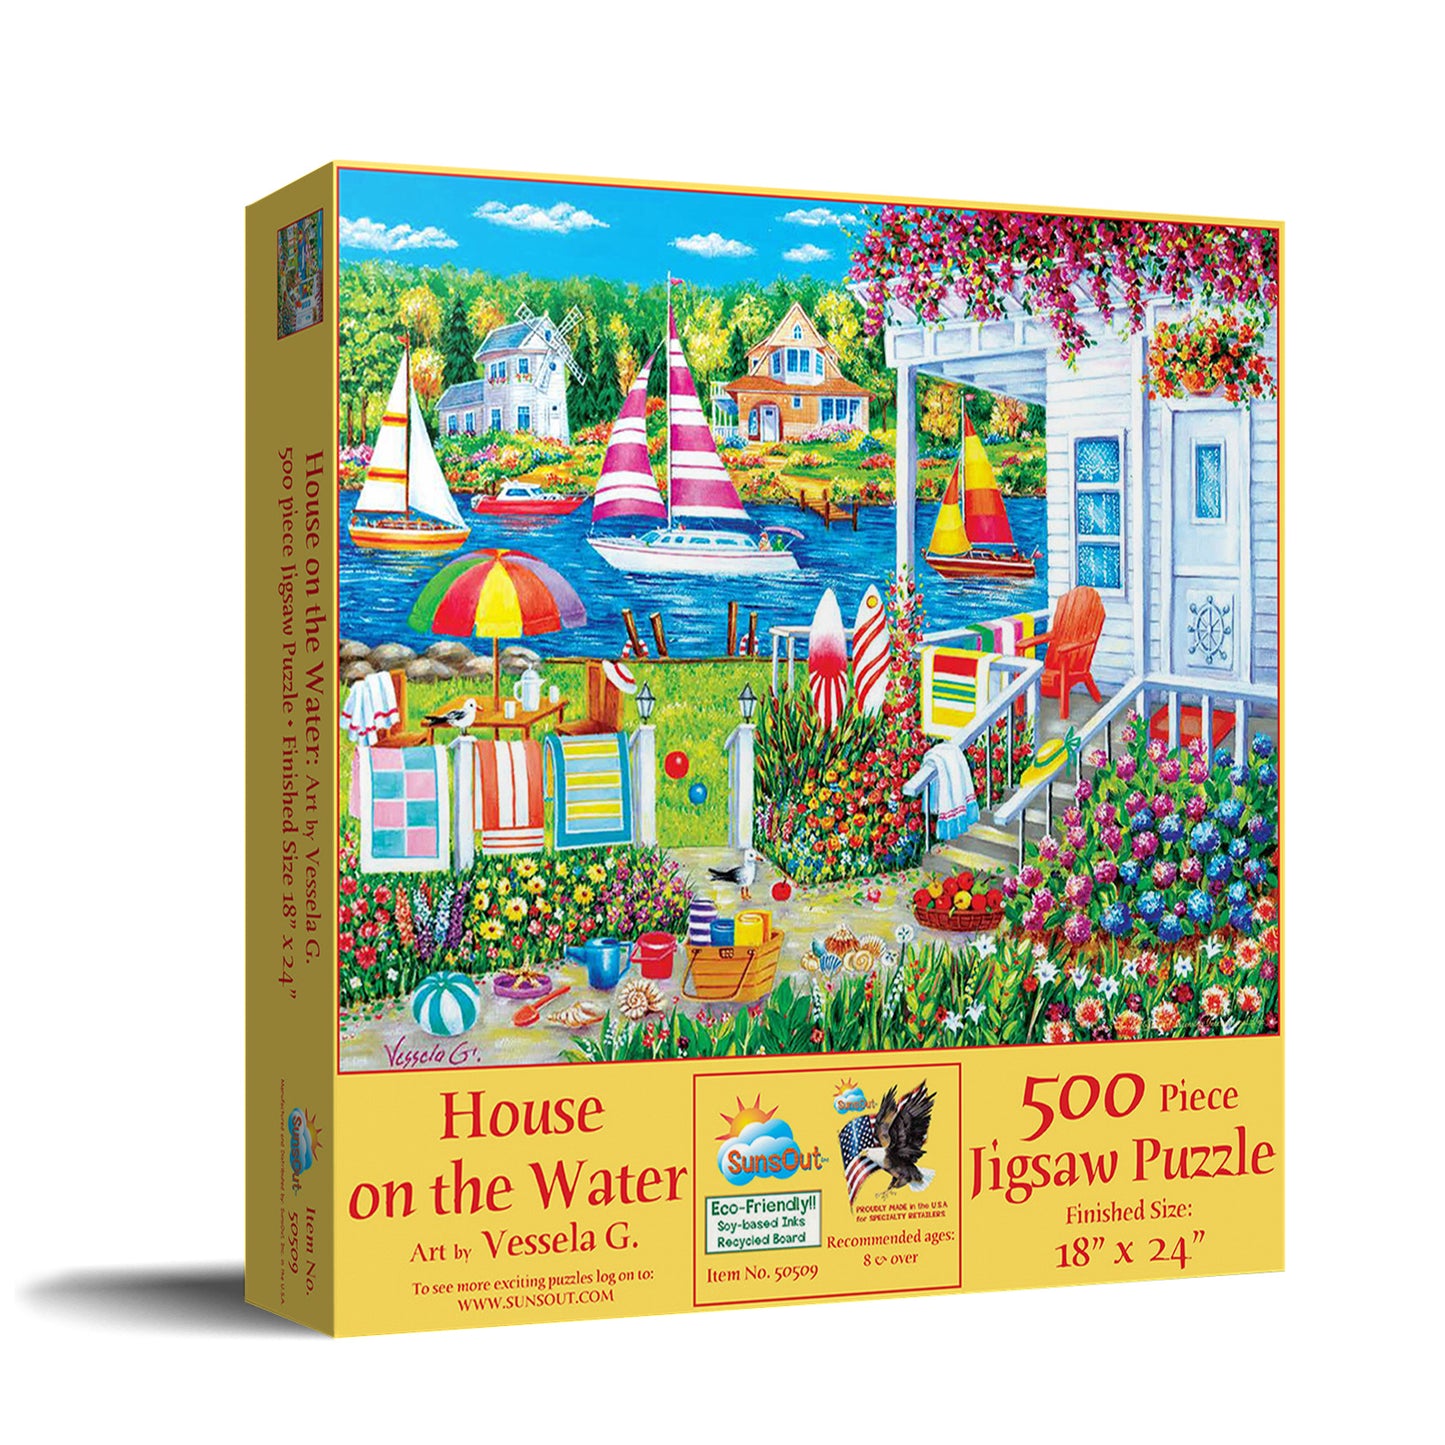 House on the Water - 500 Piece Jigsaw Puzzle